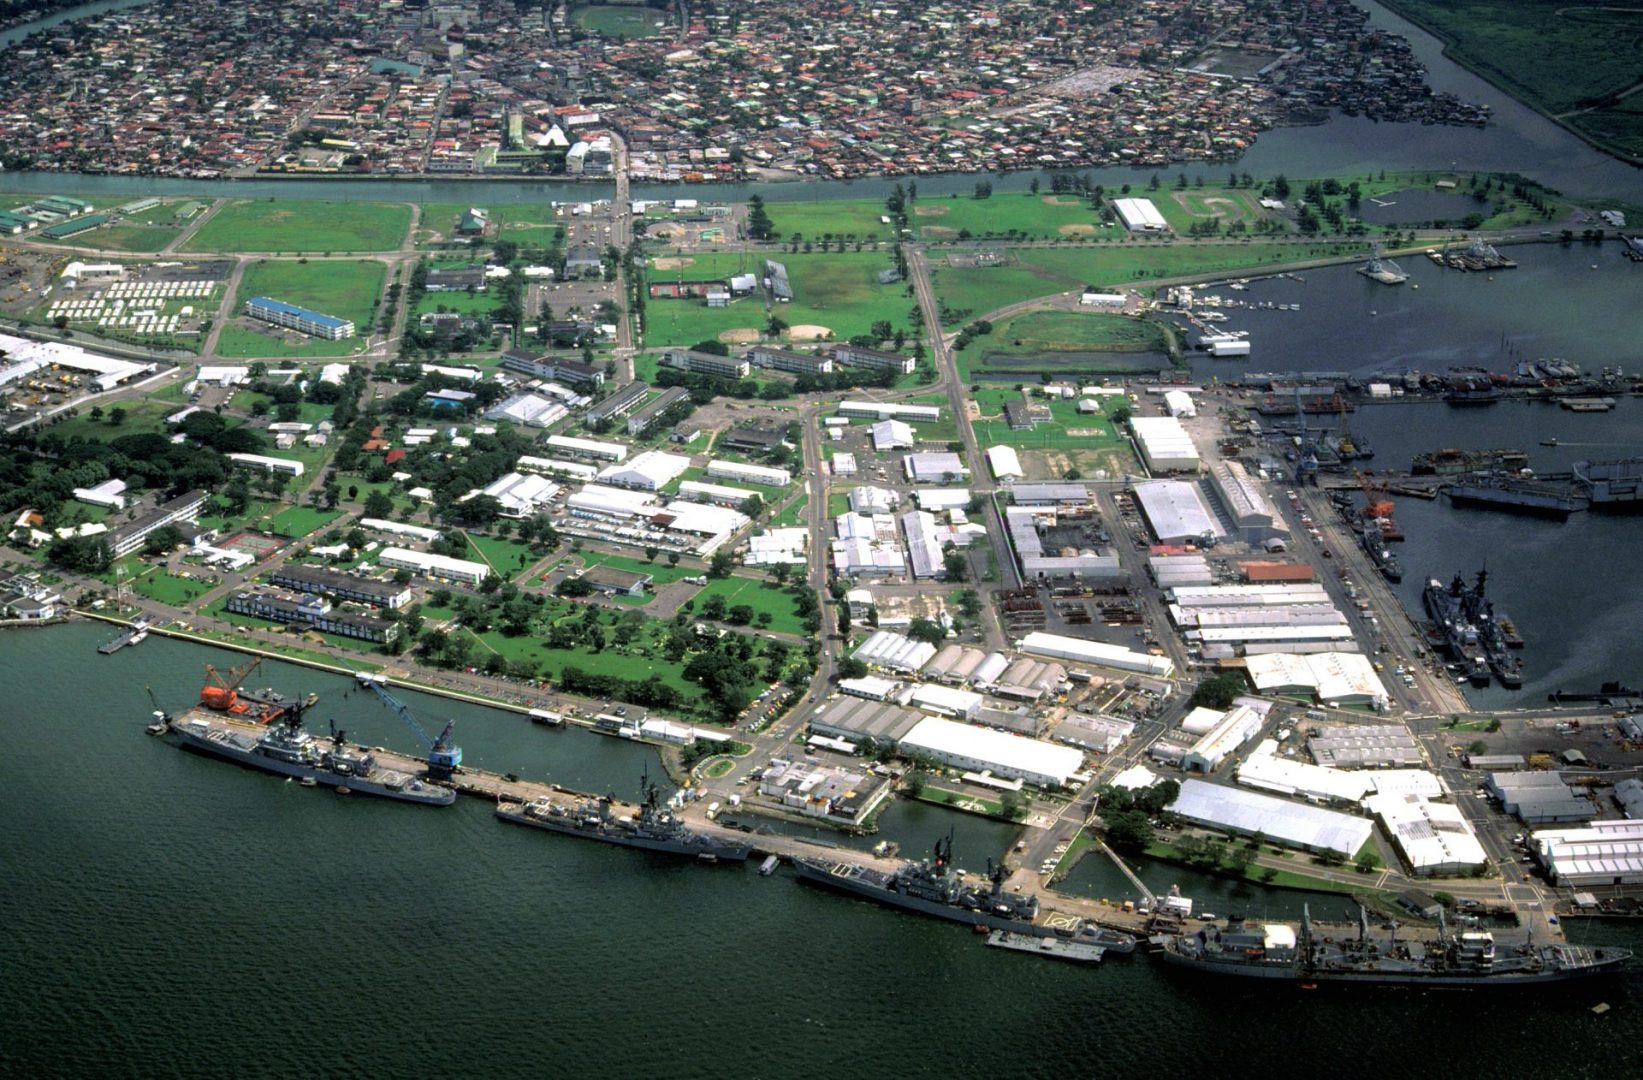 A view of the Naval Base, Subic Bay, with the city of Olongapo in the background. The ships docked at the pier in the foreground are, from right: the oiler USNS HASSAYAMPA (T-AO-145), the guided missile cruiser USS STERETT (CG-31), the guided missile destroyer USS HENRY B. WILSON (DDG-7) and the guided missile cruiser WILLIAM H. STANDLEY (CG-32).